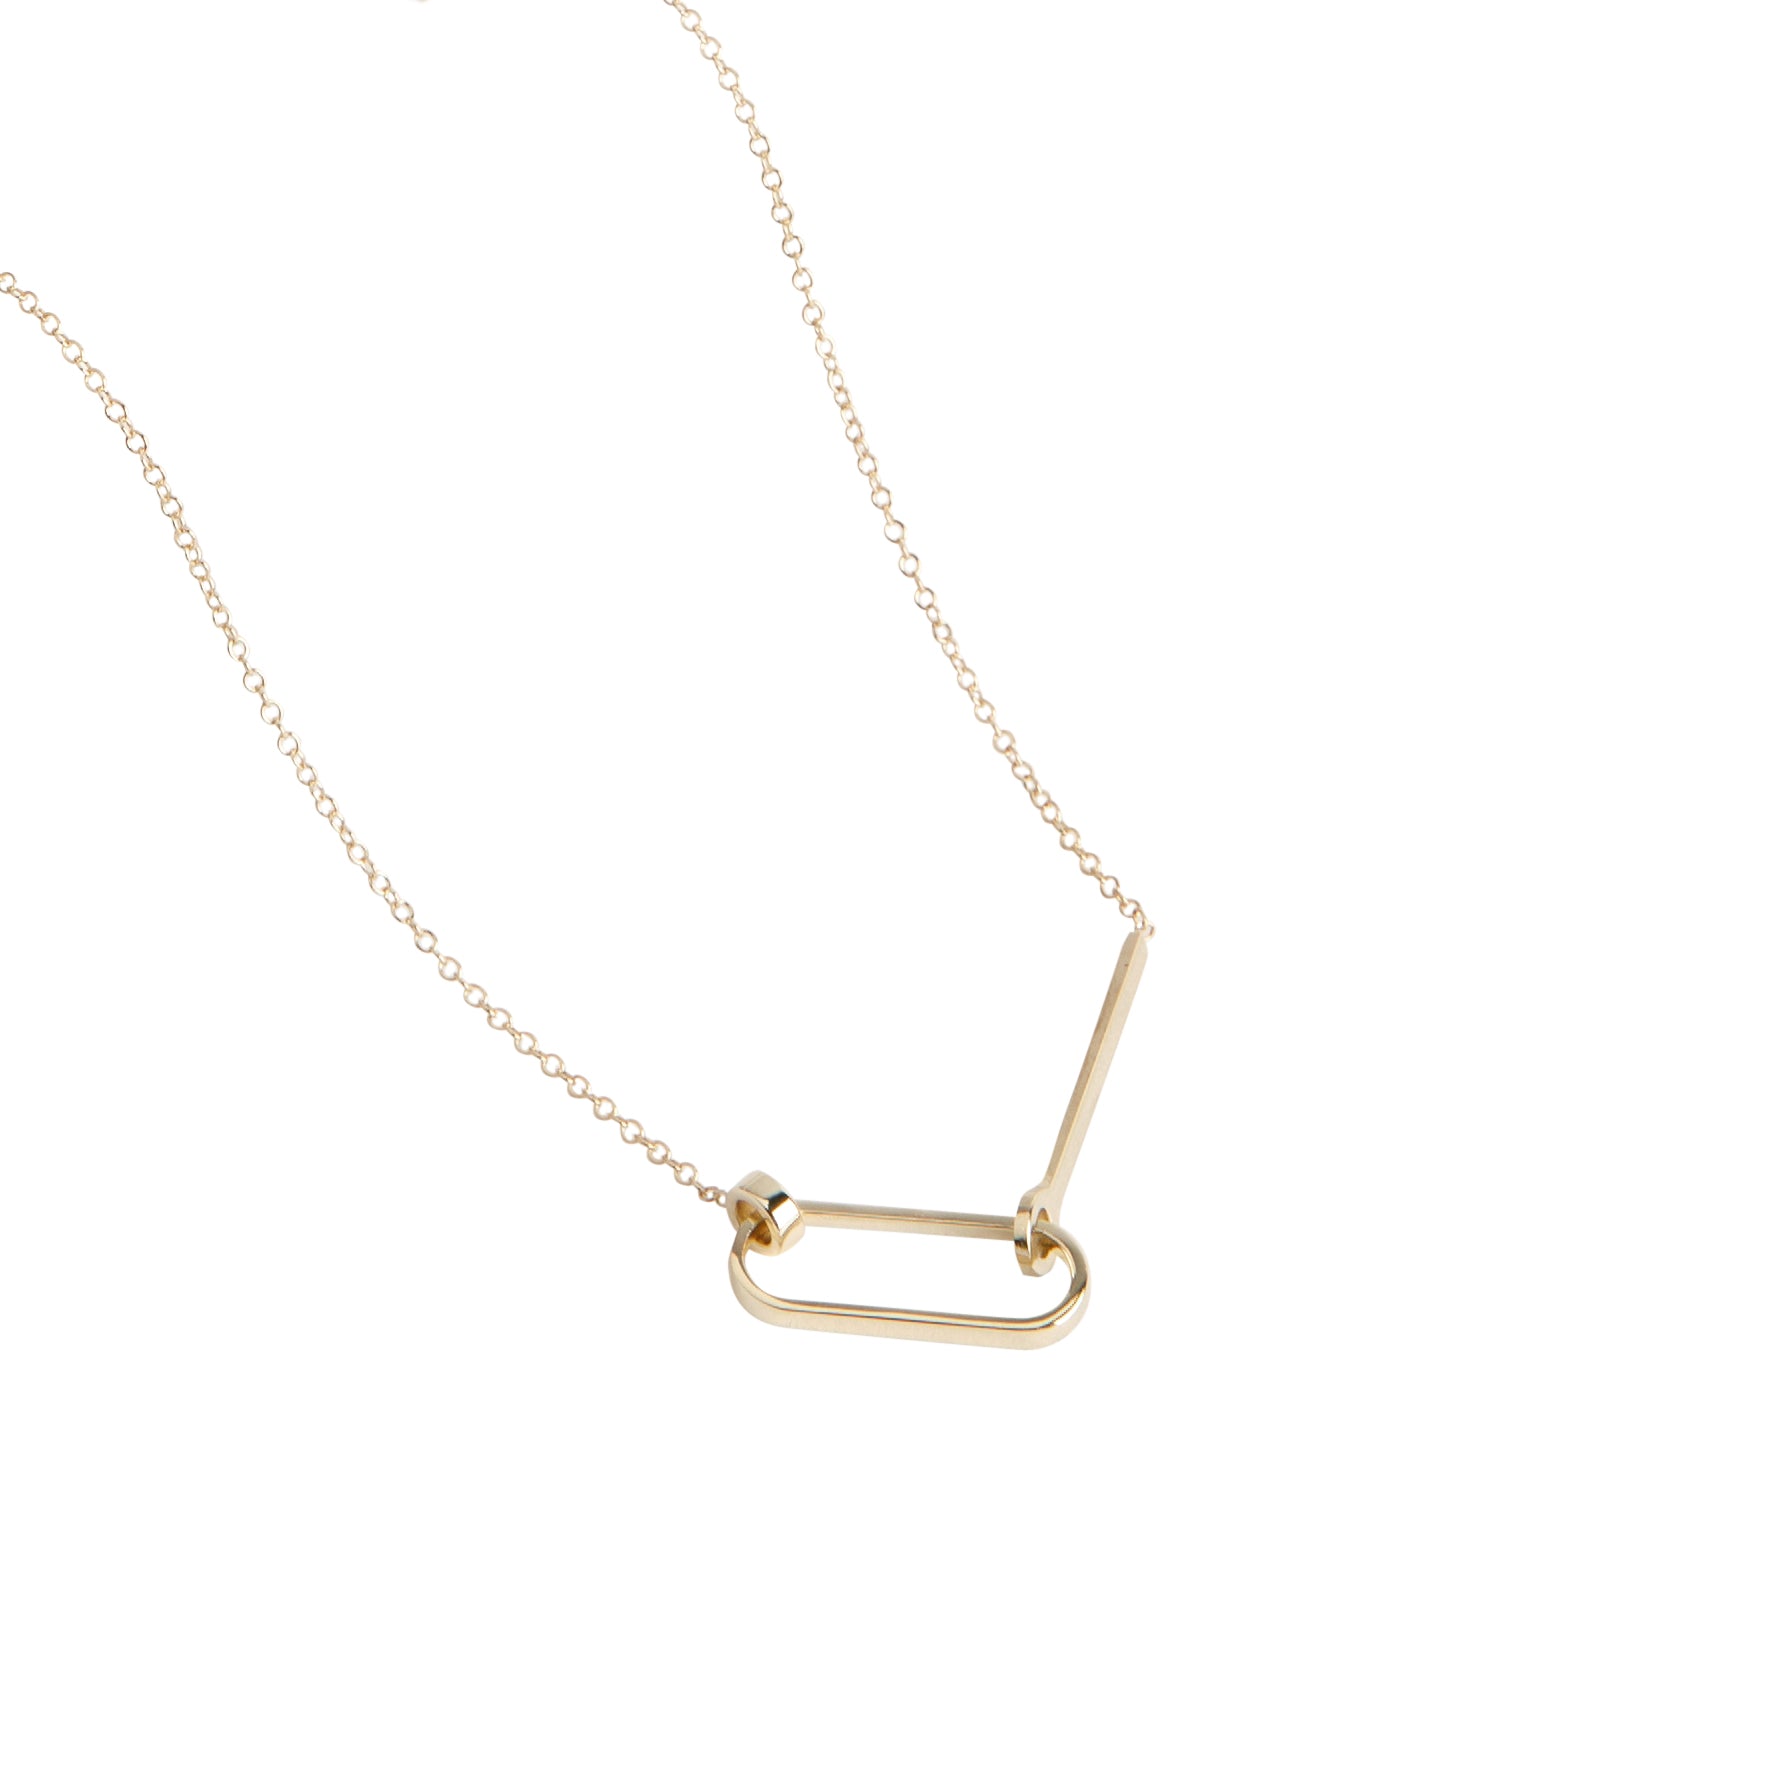 Visi Designer Necklace in 14k Gold By SHW Fine Jewelry NYC